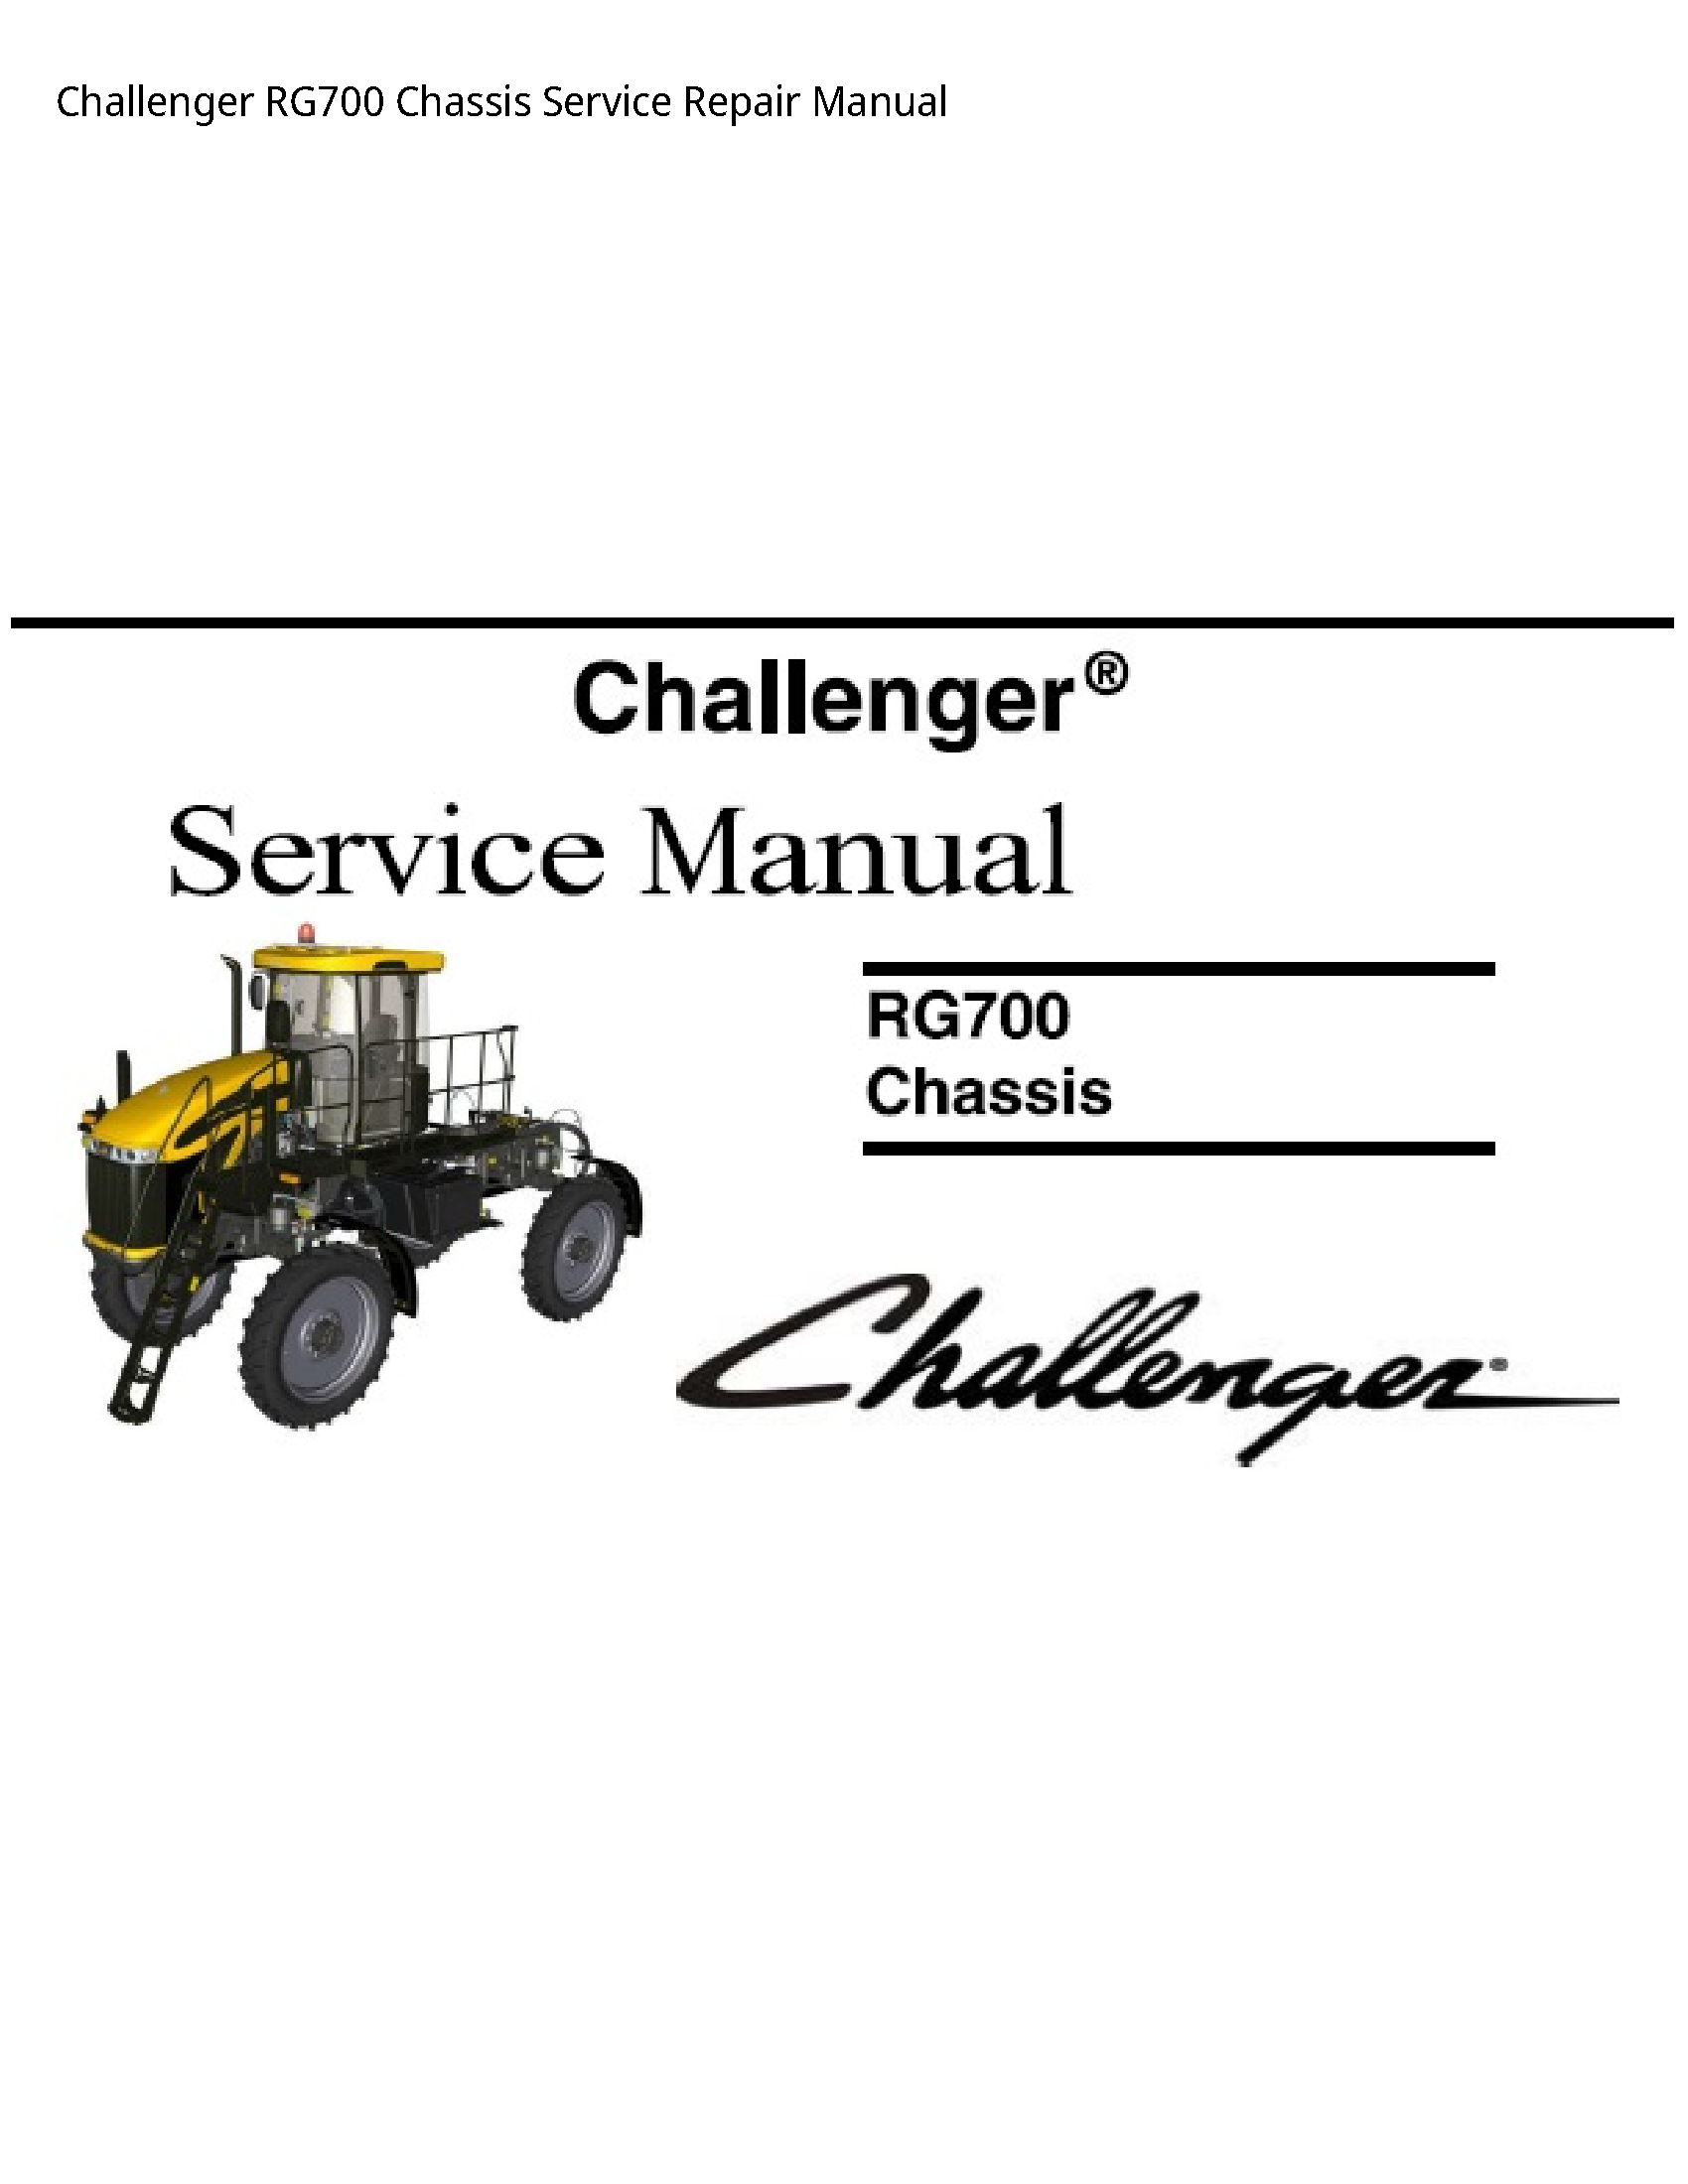 Challenger RG700 Chassis manual